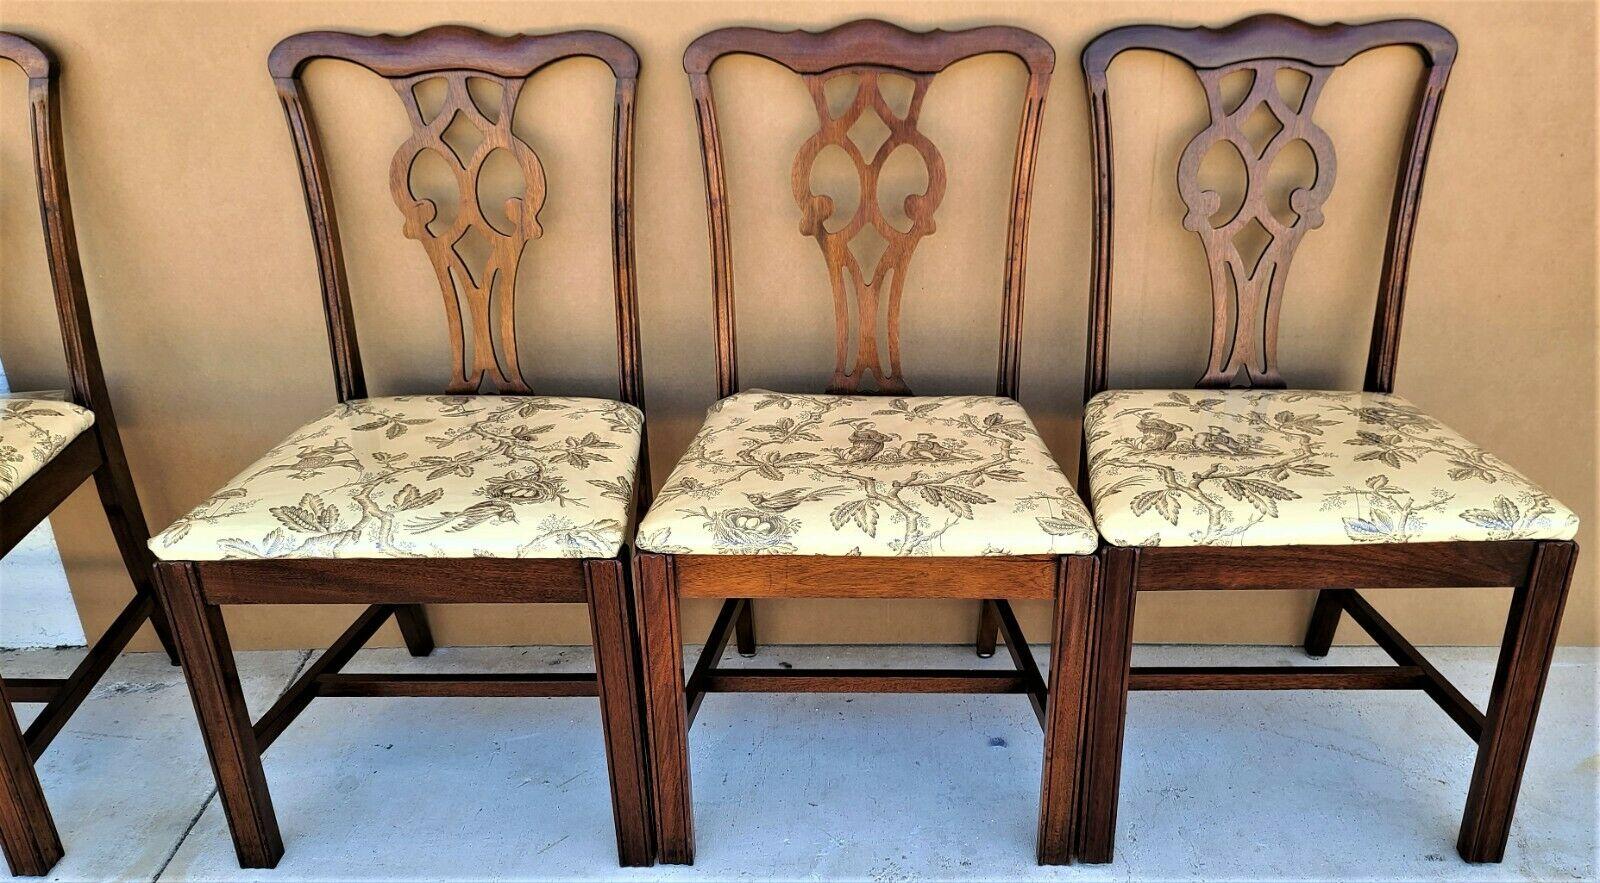 Offering one of our recent palm beach estate fine furniture acquisitions of A 
Vintage Chippendale solid mahogany dining chairs by Statesville Chair Co - Set of 5

With Asian-themed fabric protected by plastic.

Approximate Measurements in